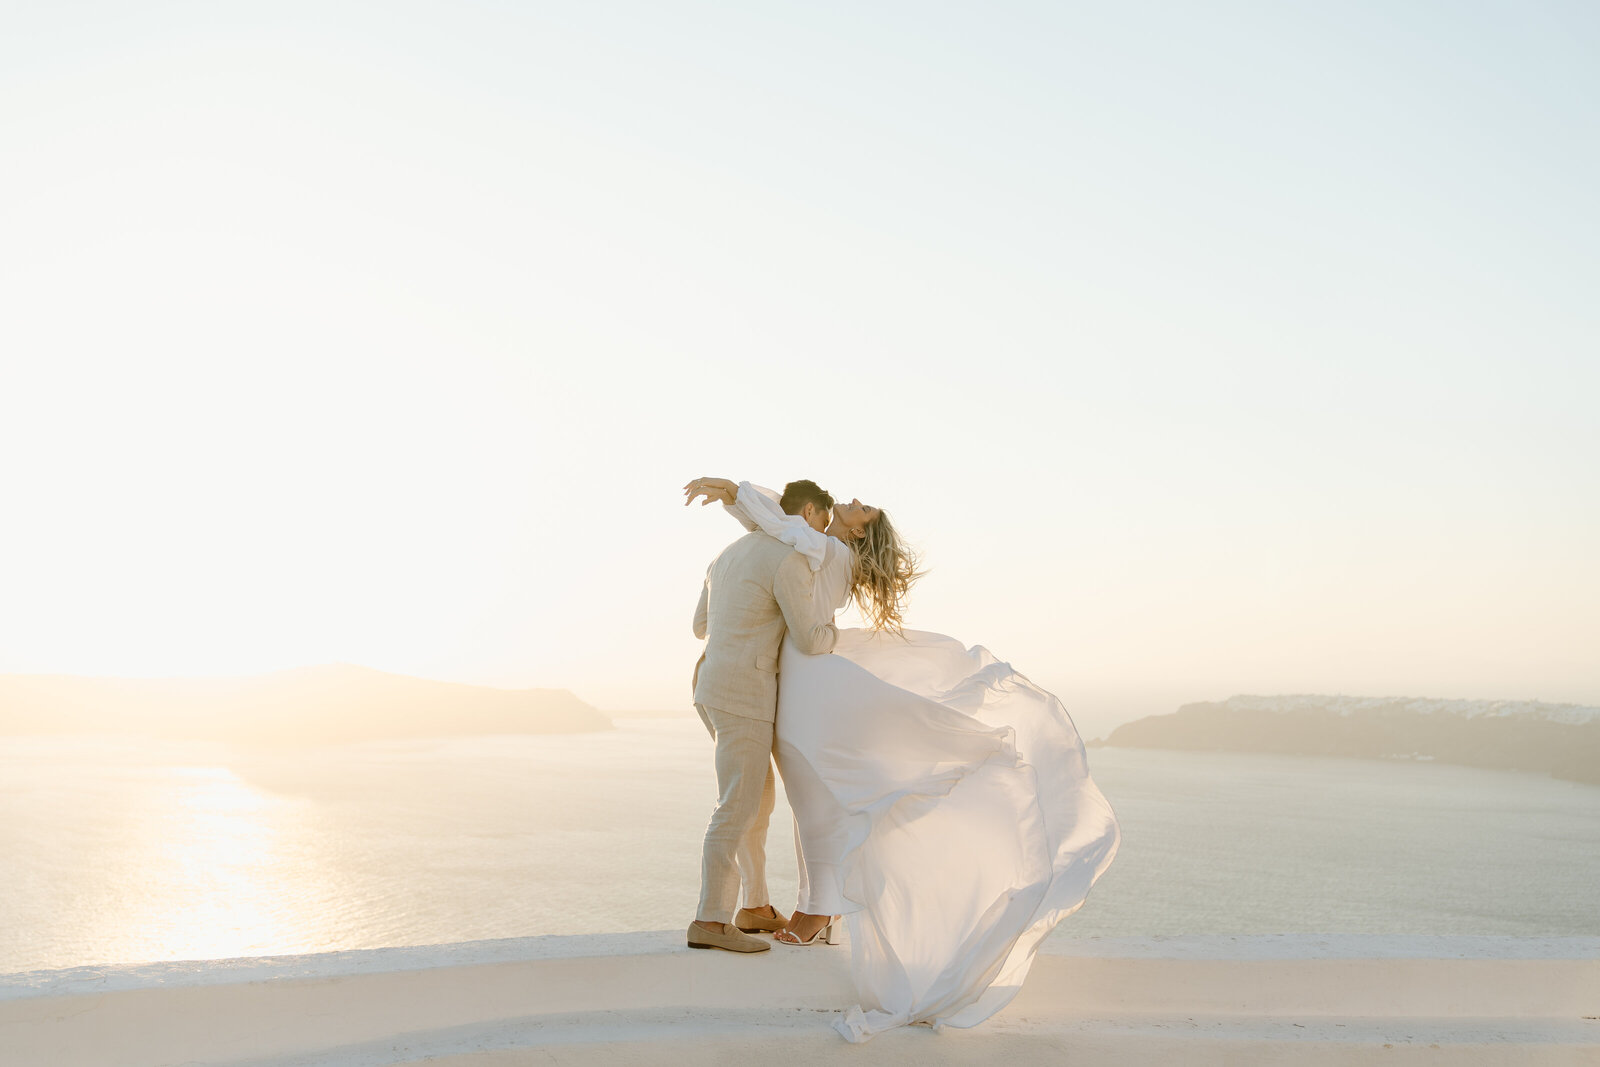 Couple in wedding attire elopeing on a rooftop in Santorini Greece